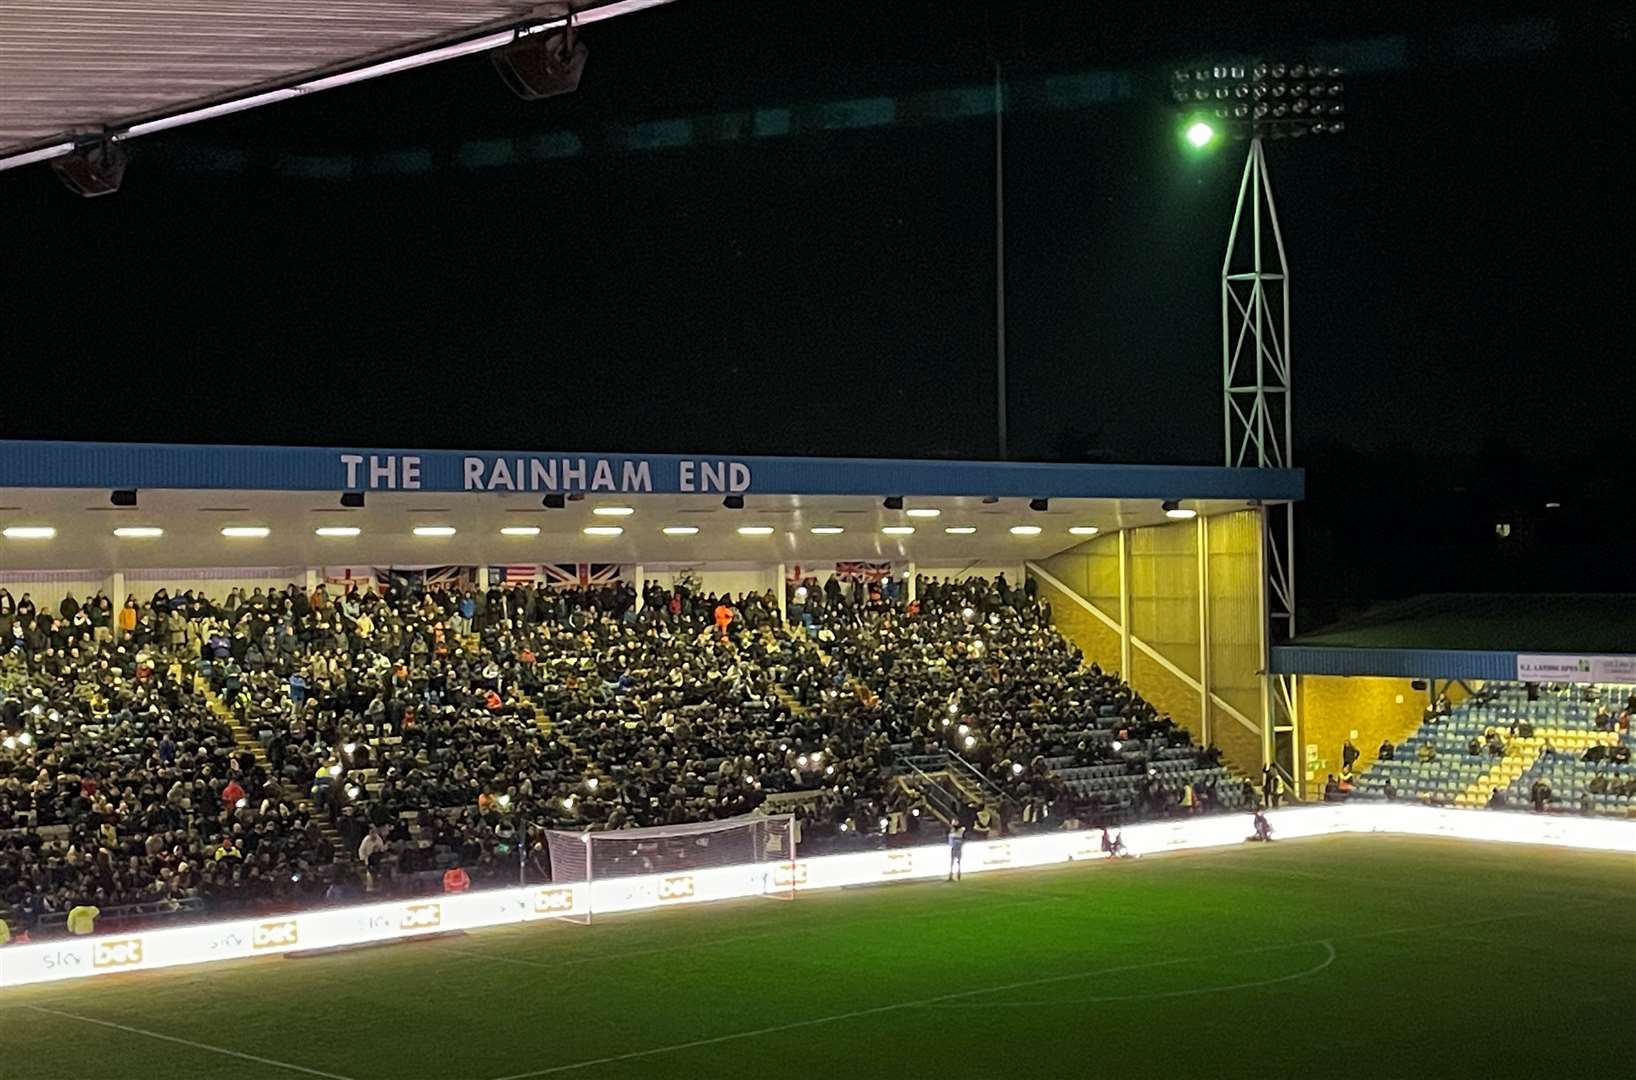 The floodlights went out at Priestfield with 64 minutes played, the game goalless at the time